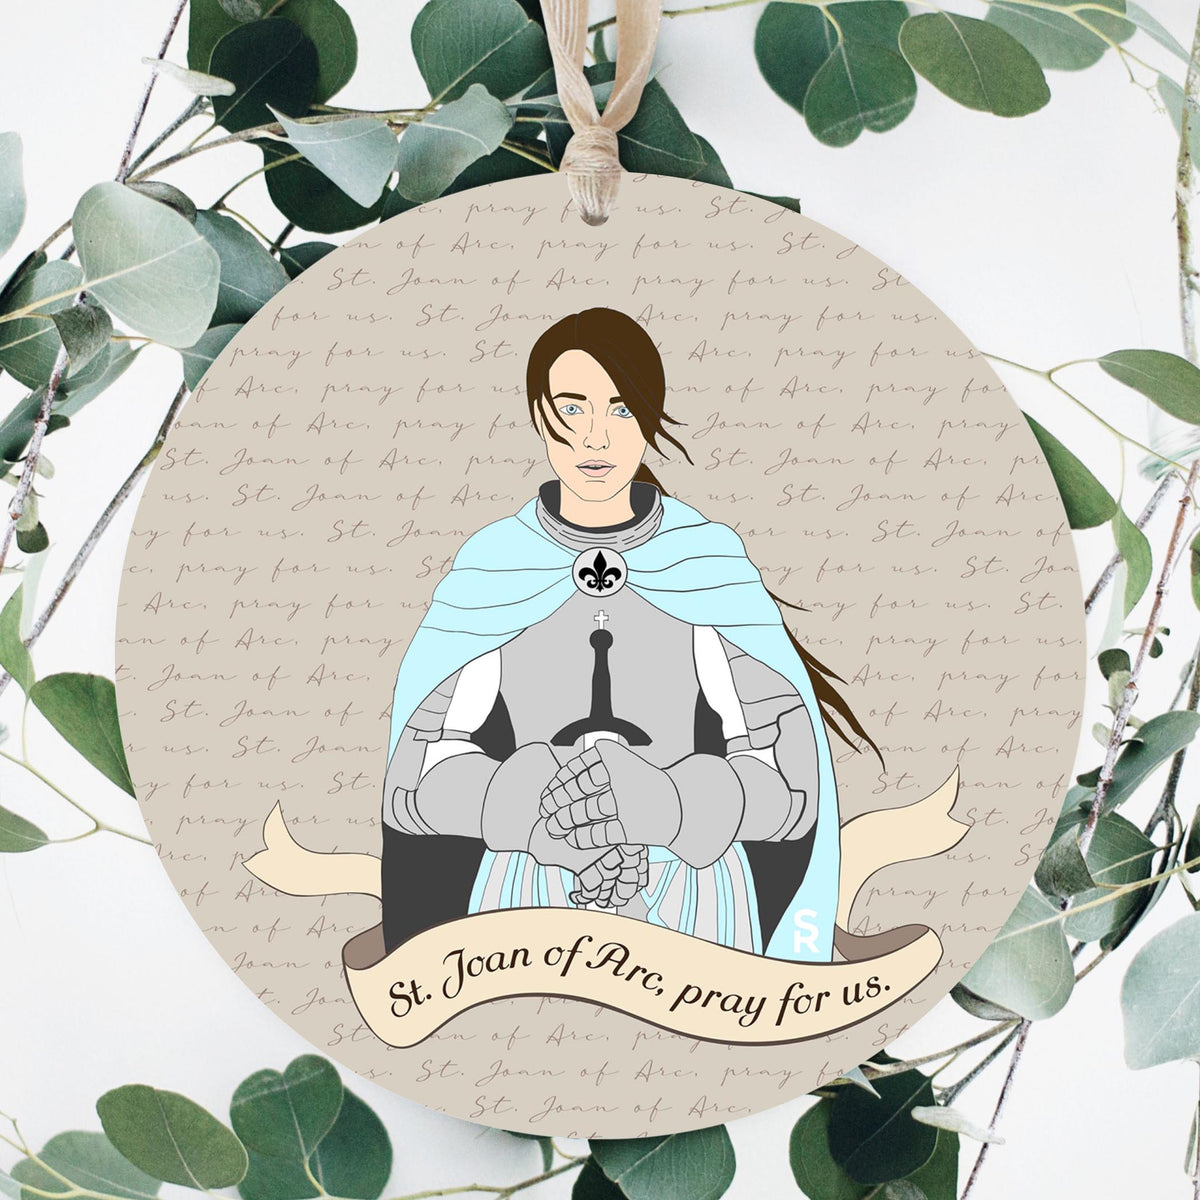 St. Joan of Arc Round 8 inch Hanging Wood Plaque